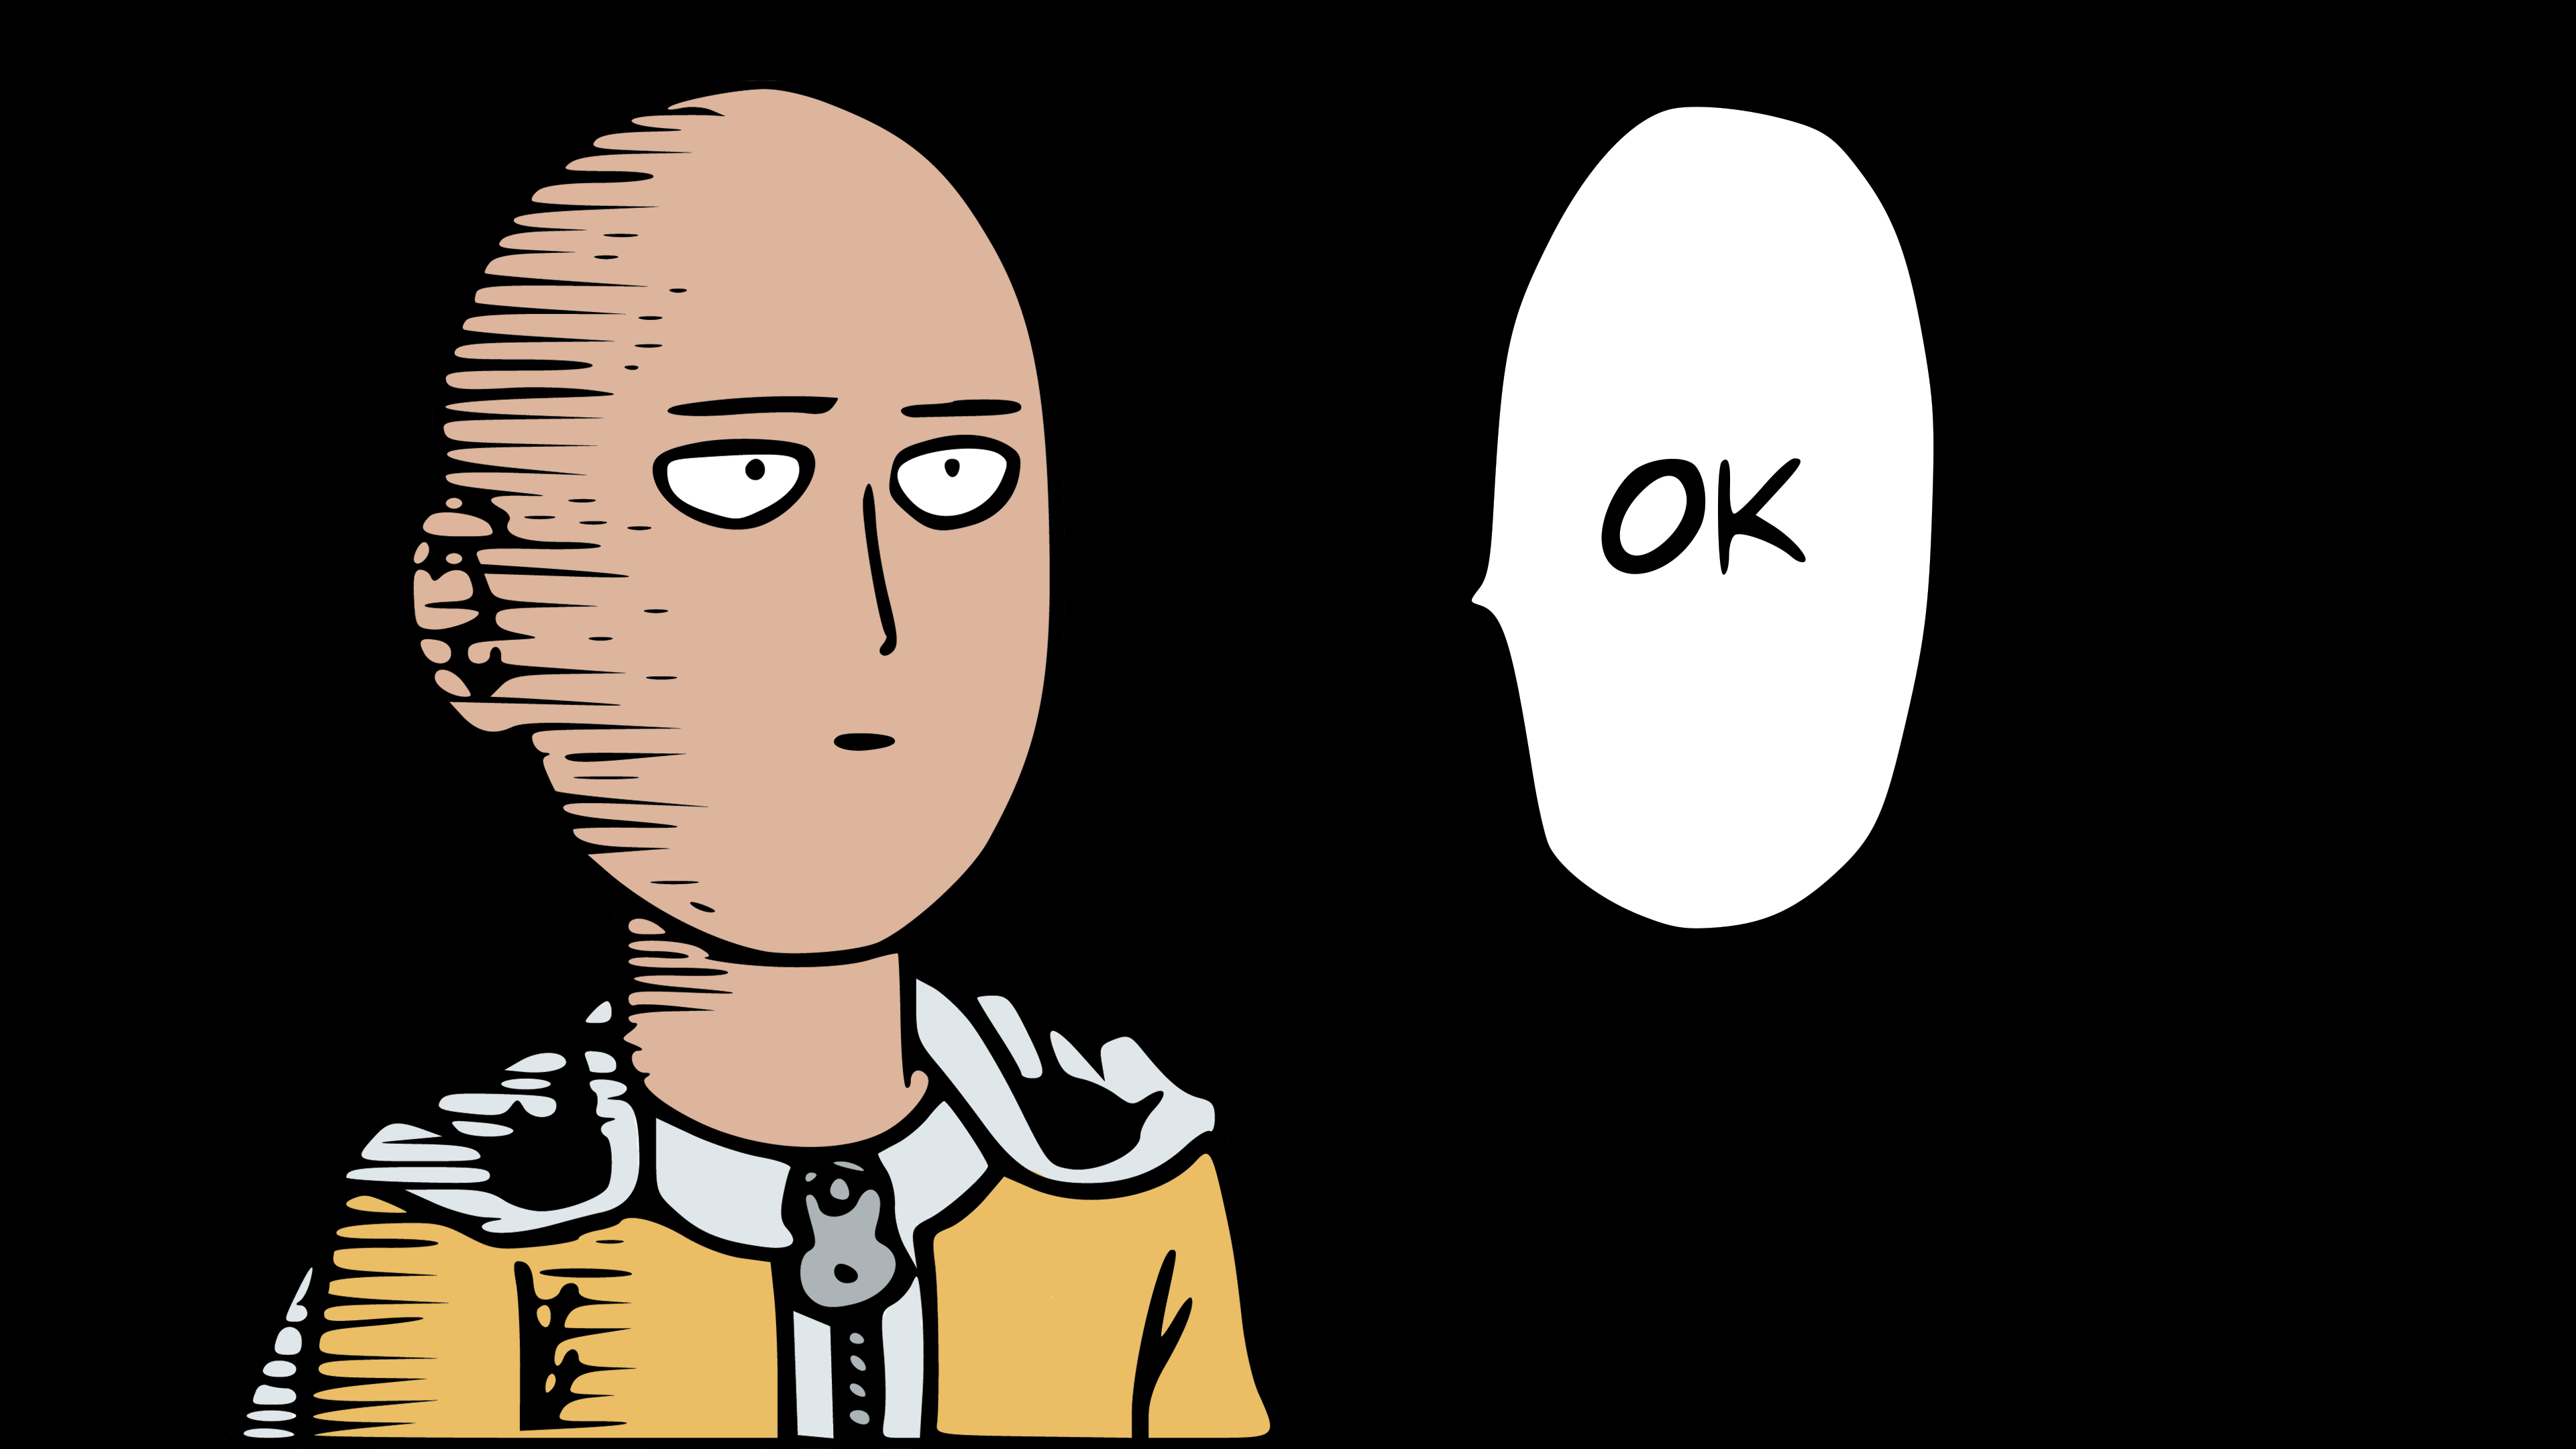 4k Wallpaper One Punch Man Know Your Meme